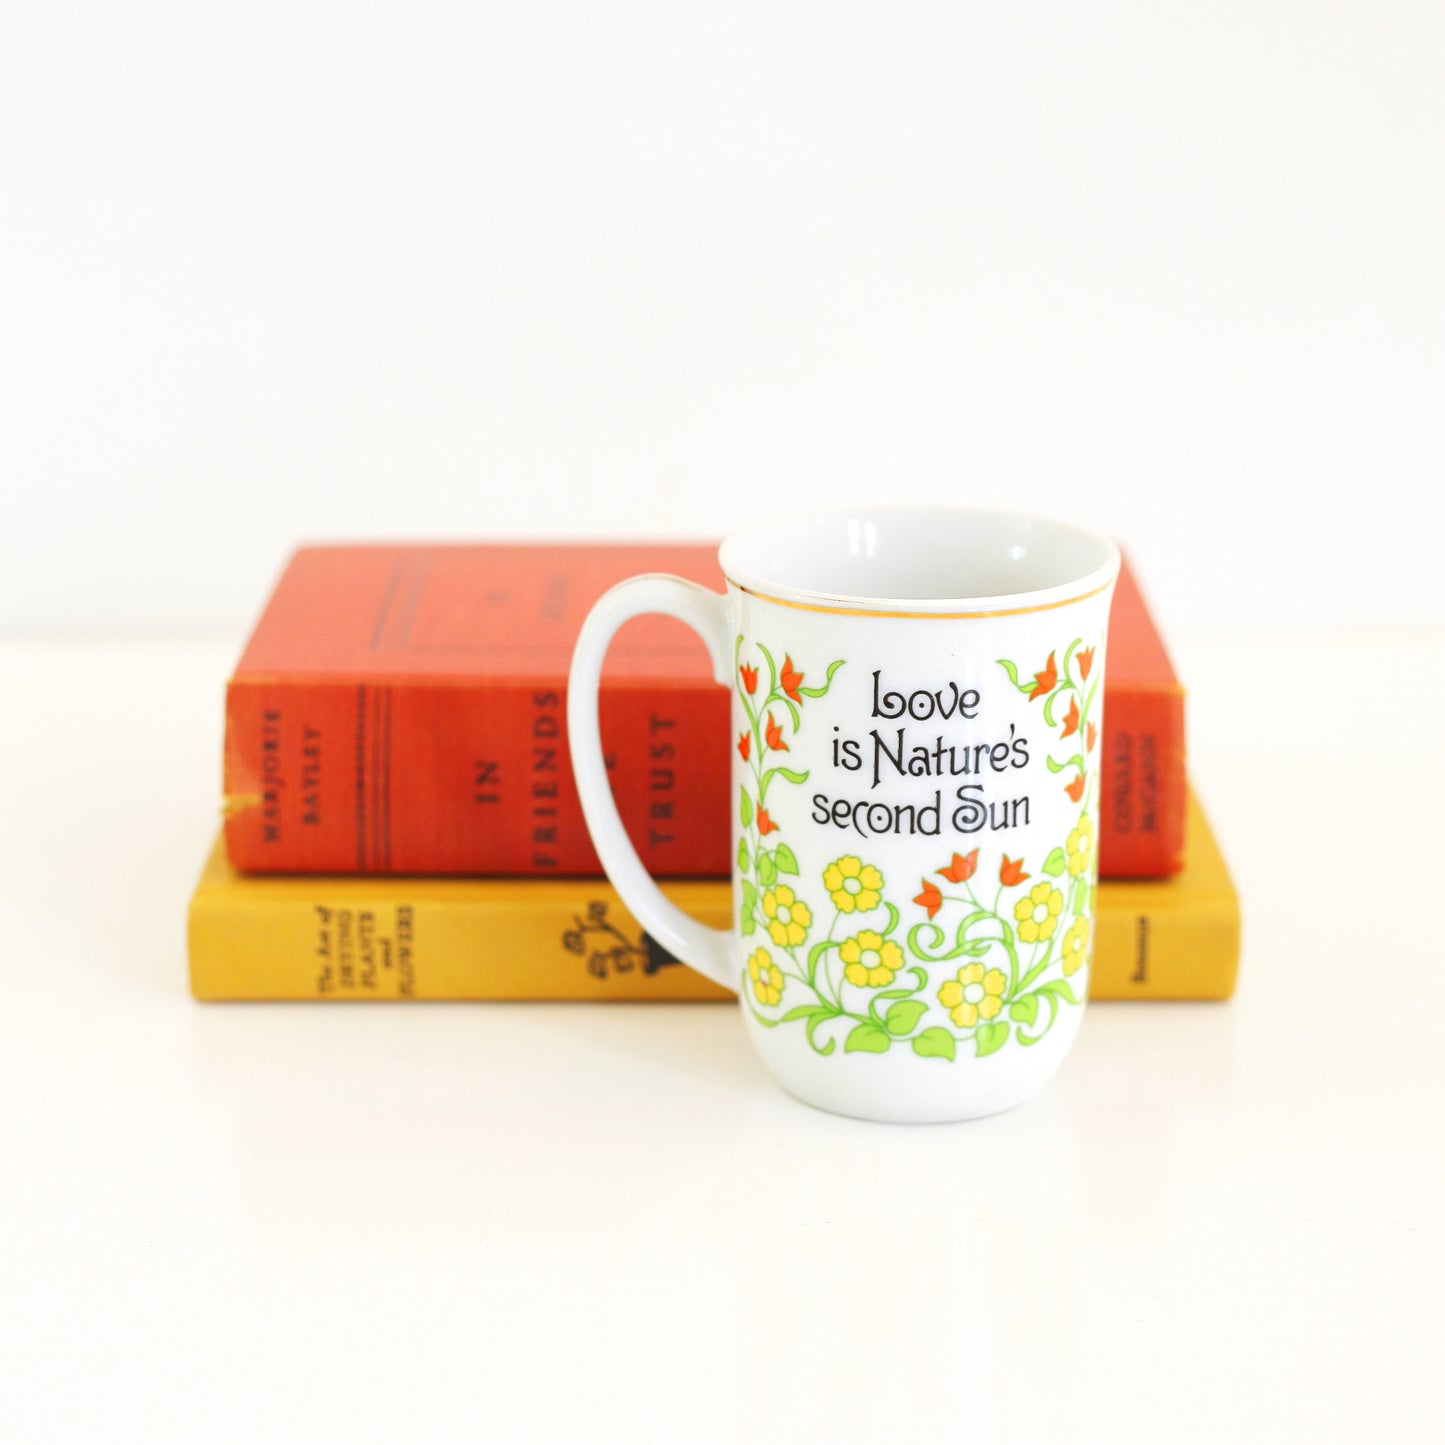 SOLD - Vintage Coffee Mug - Love Is Nature's Second Sun